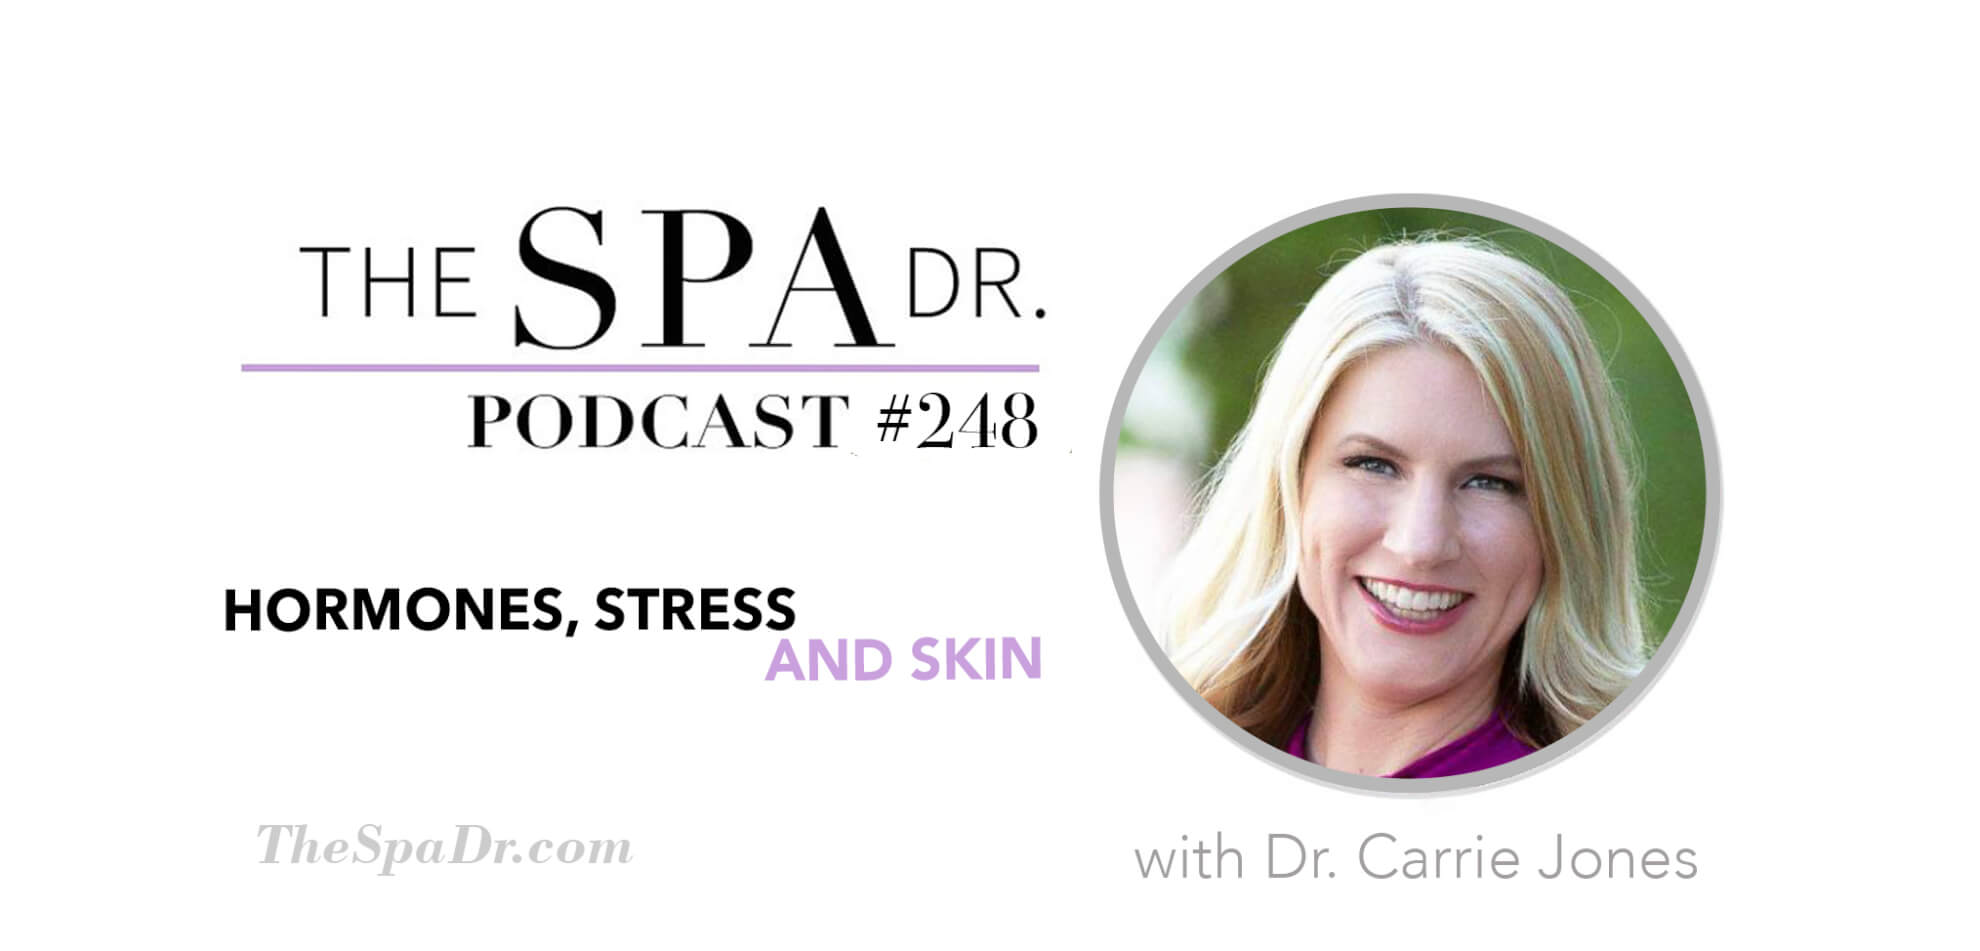 Hormones, Stress and Skin with Dr. Carrie Jones